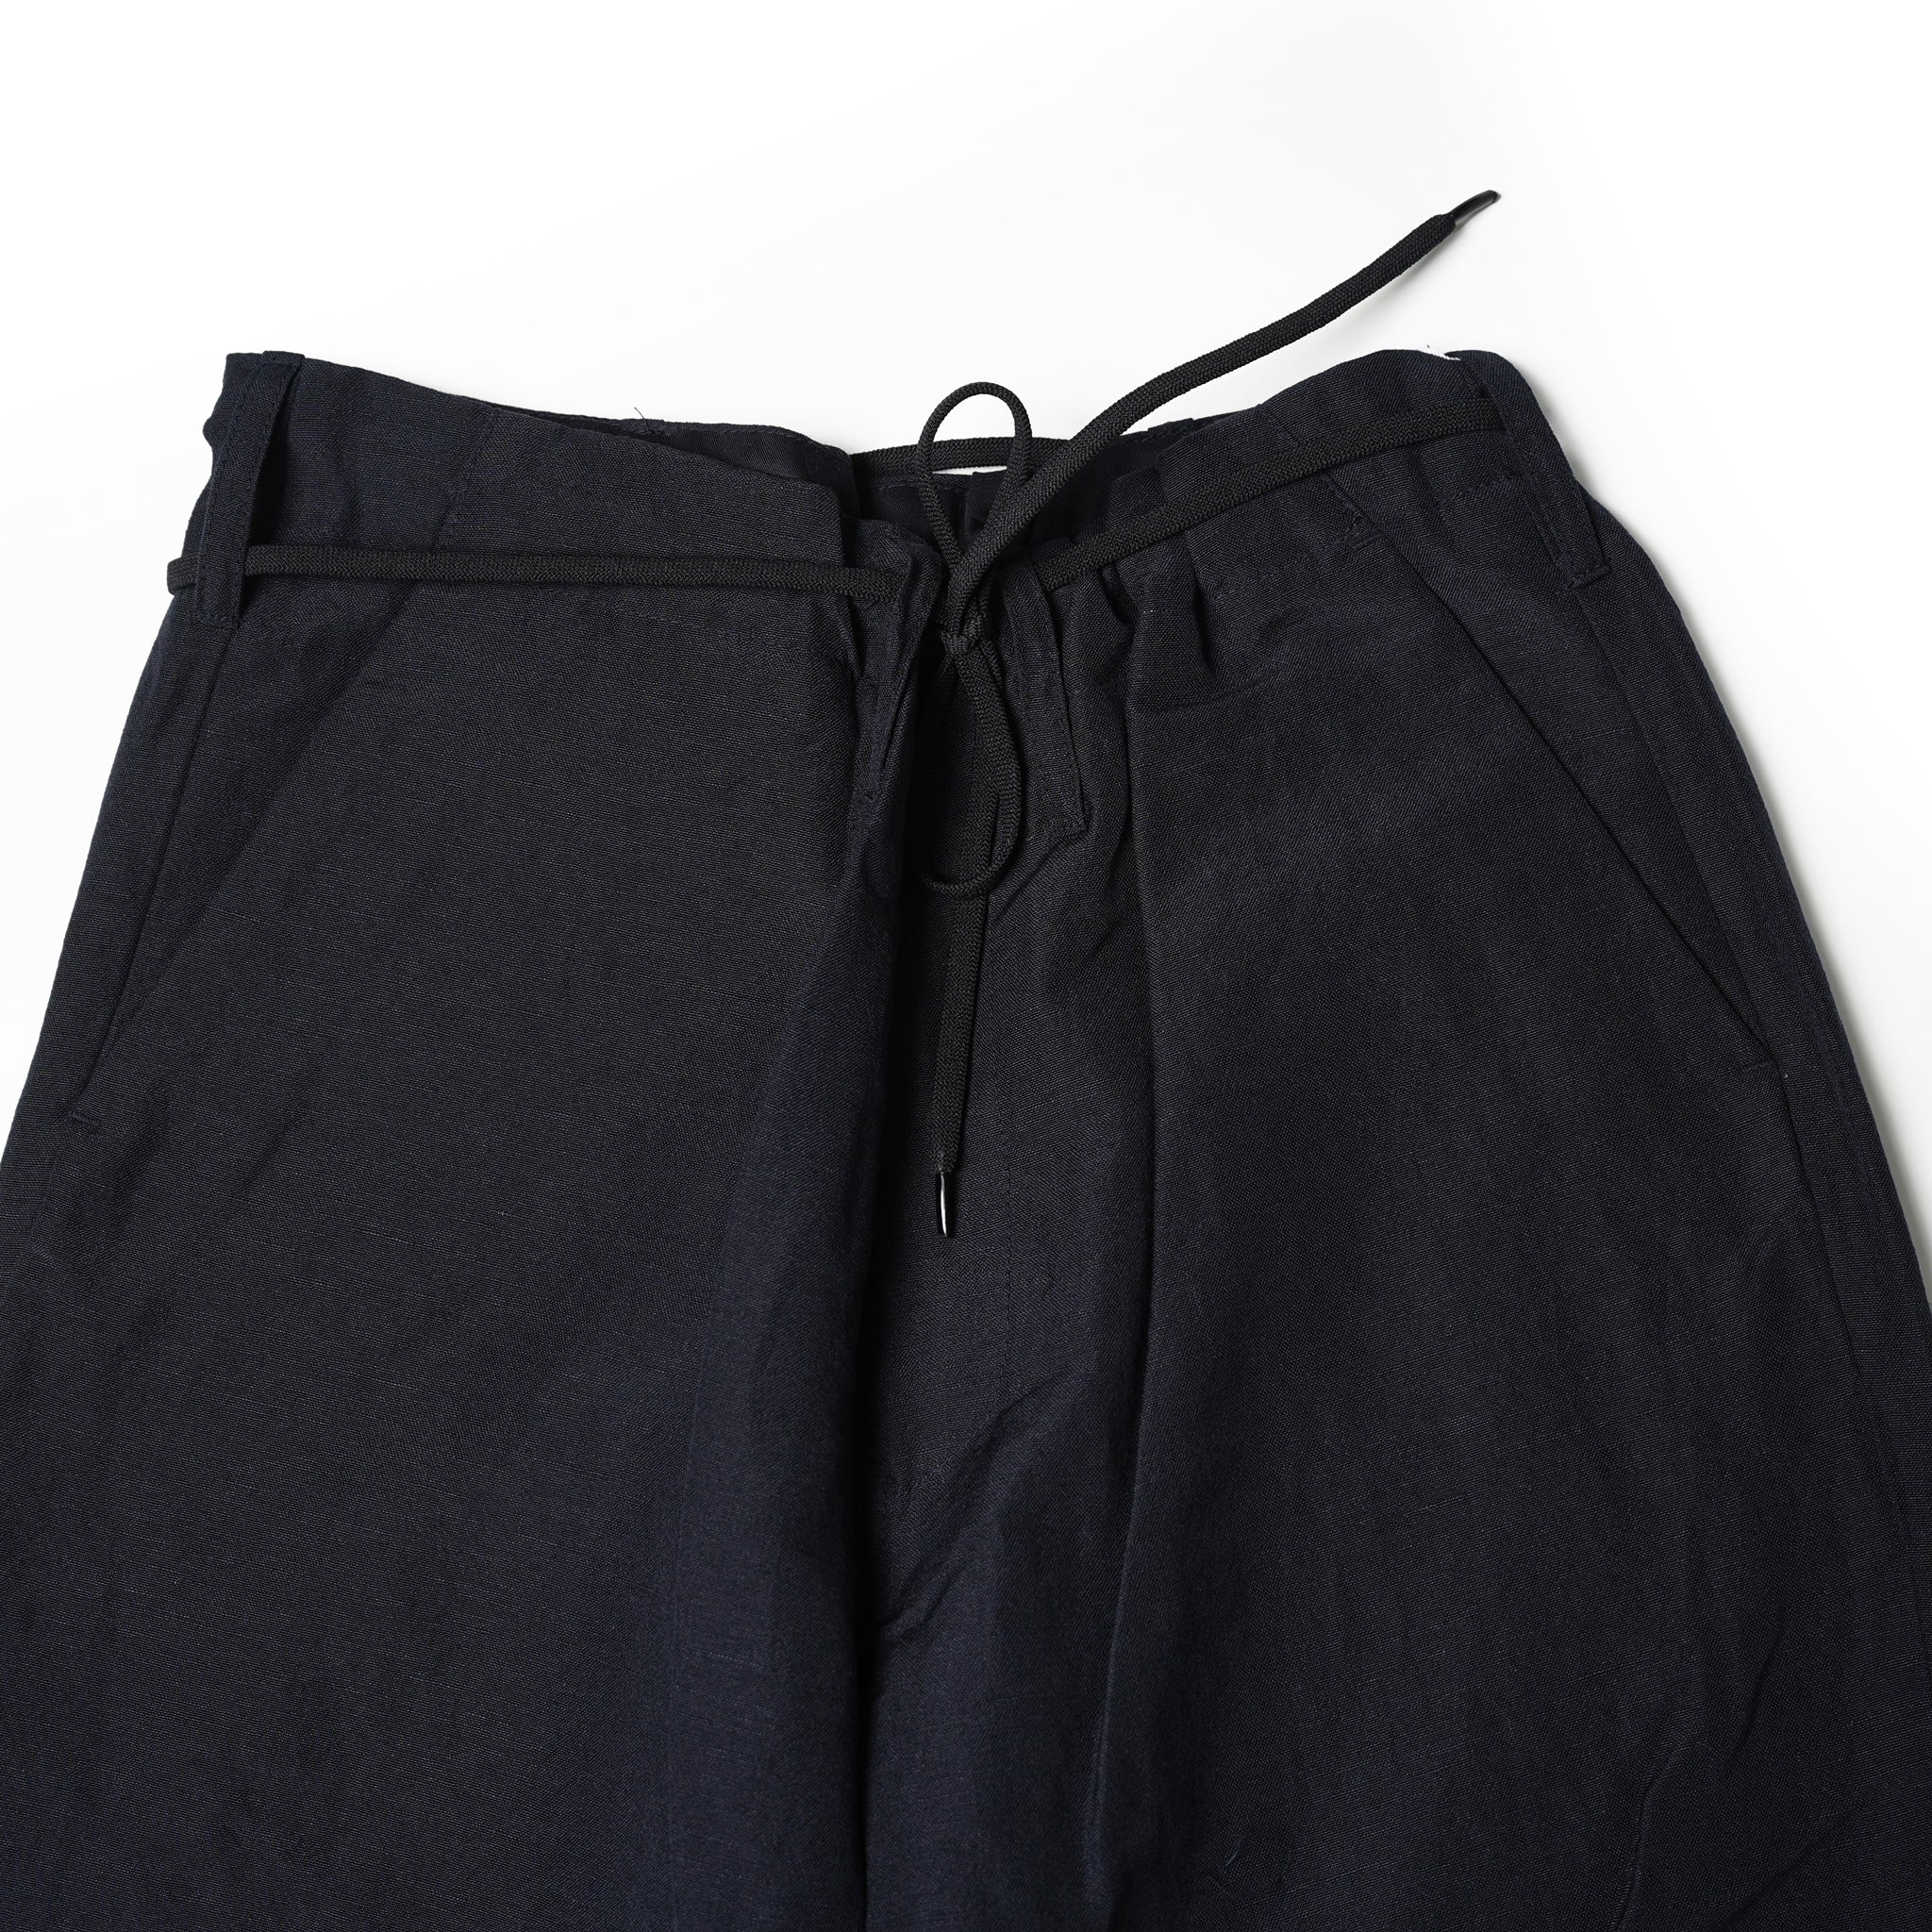 Name: Non-Elastic E-Z Pants Dead Stock Fabric Collection | Color:Navy | Size: One Fits All 【CITYLIGHTS PRODUCTS_シティライツプロダクツ】